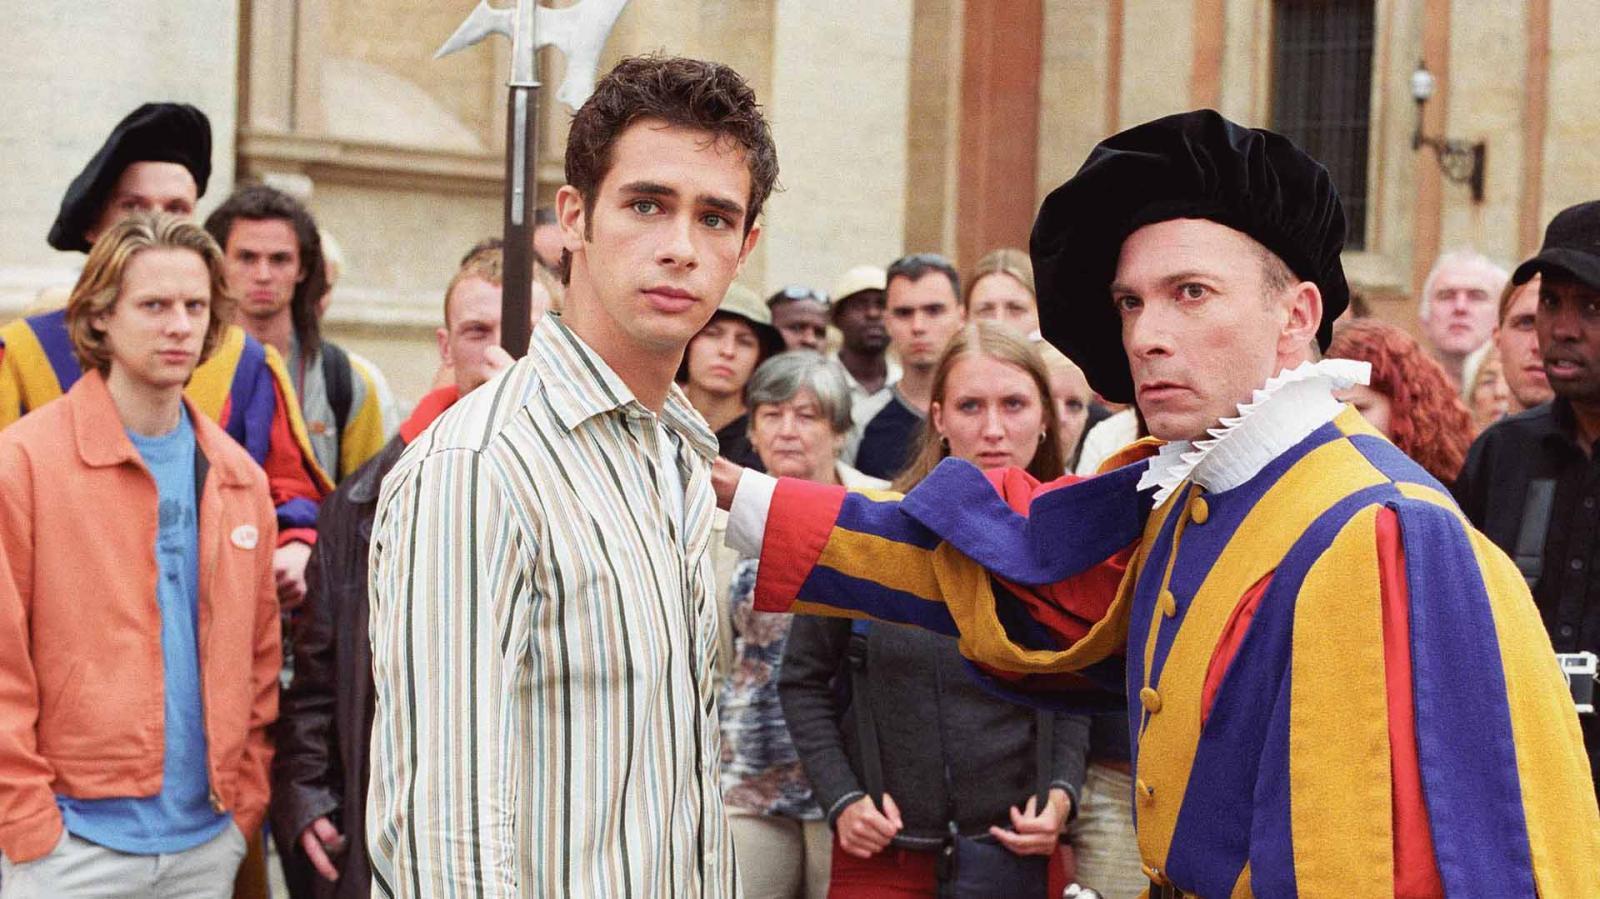 10 Hidden Comedy Gems from the Early 2000s You Might Have Missed - image 5